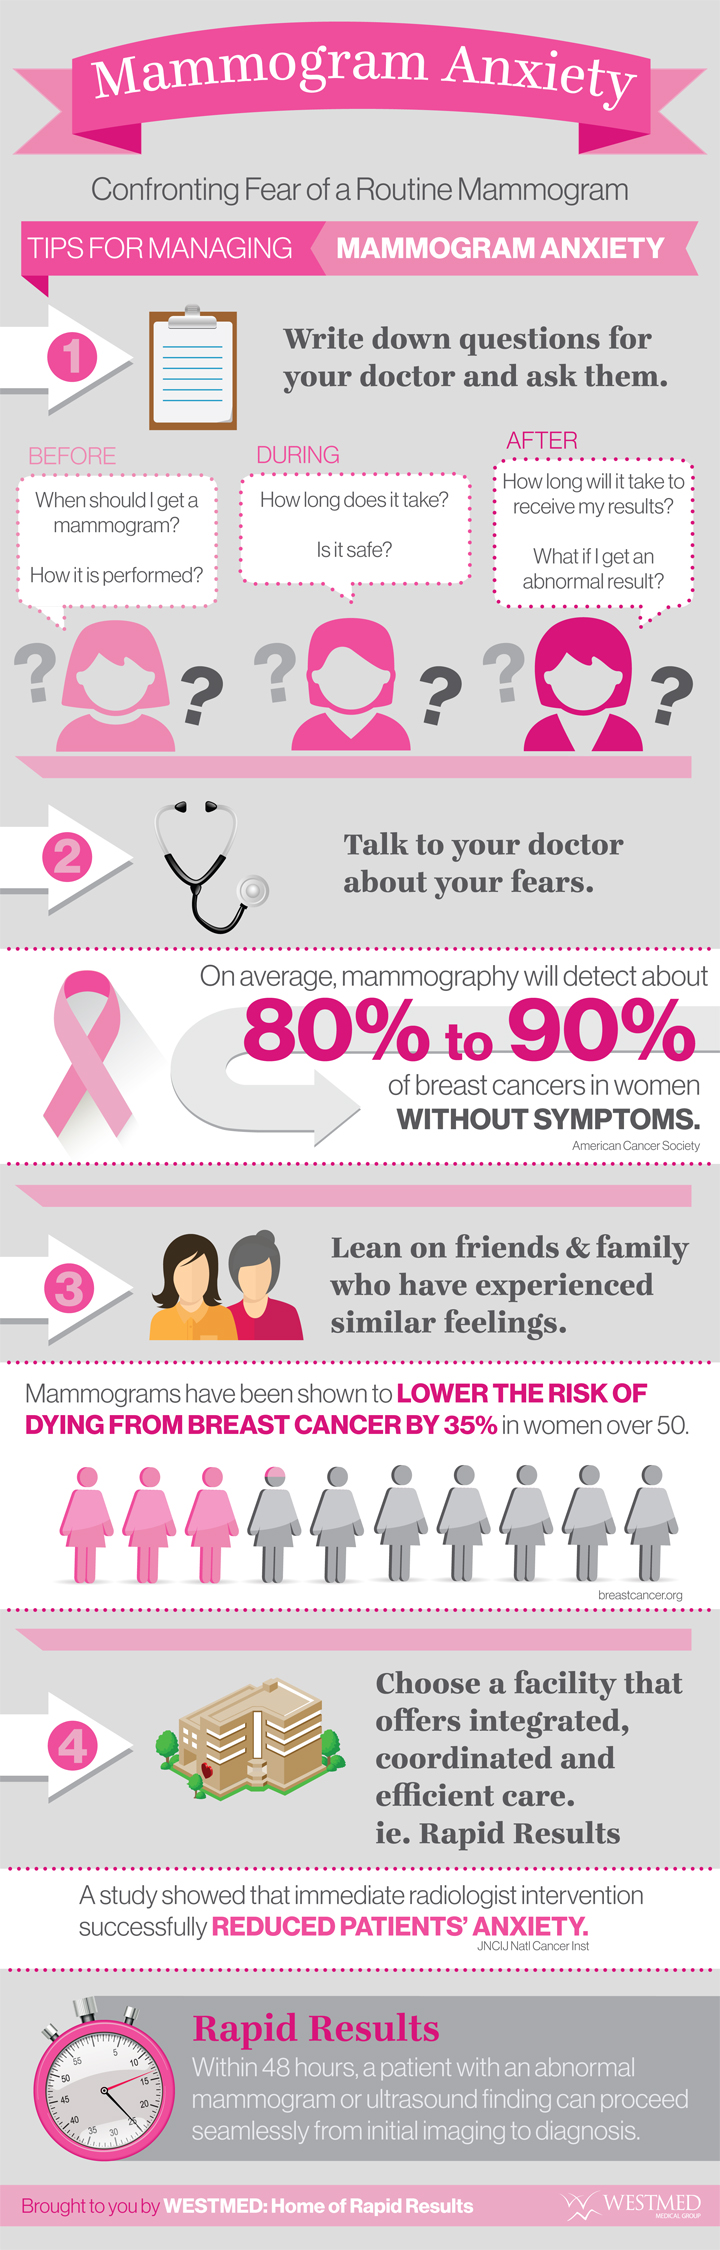 Reducing fear and anxiety associated with breast cancer screening